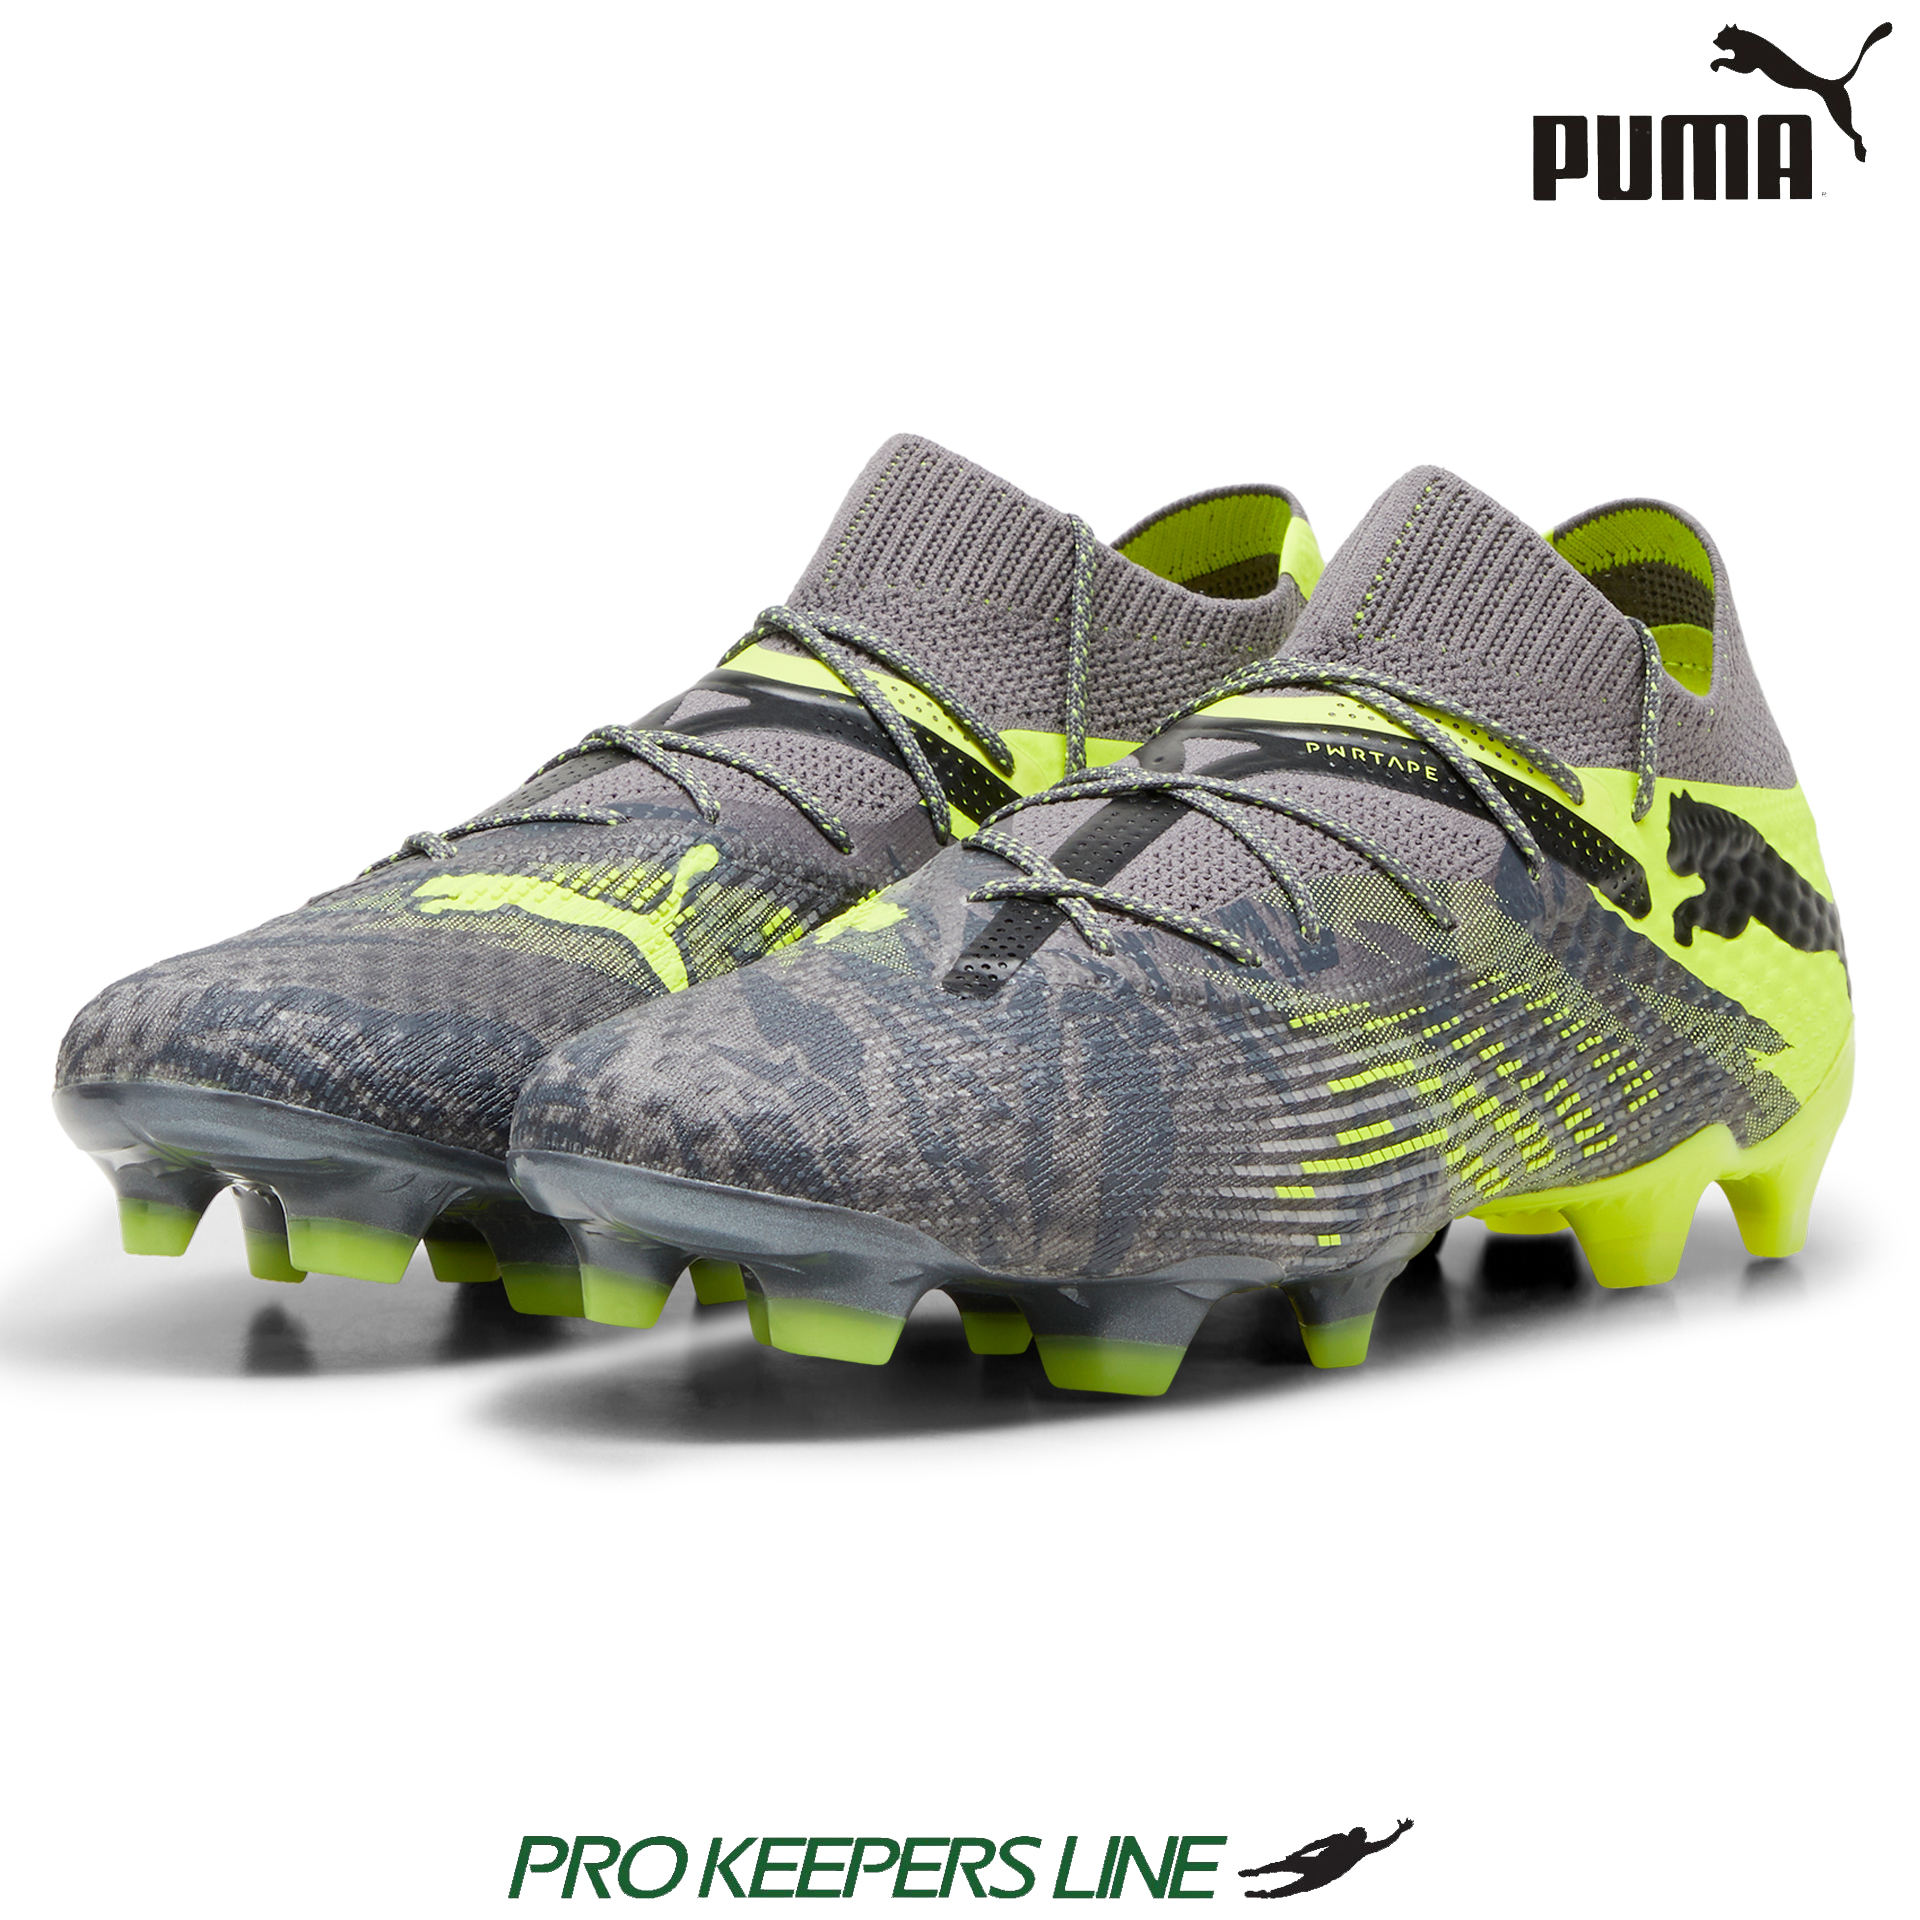 PUMA FUTURE 7 ULTIMATE RUSH FG/AG STRONG GRAY/COOL DARK GRAY/ELECTRIC LIME